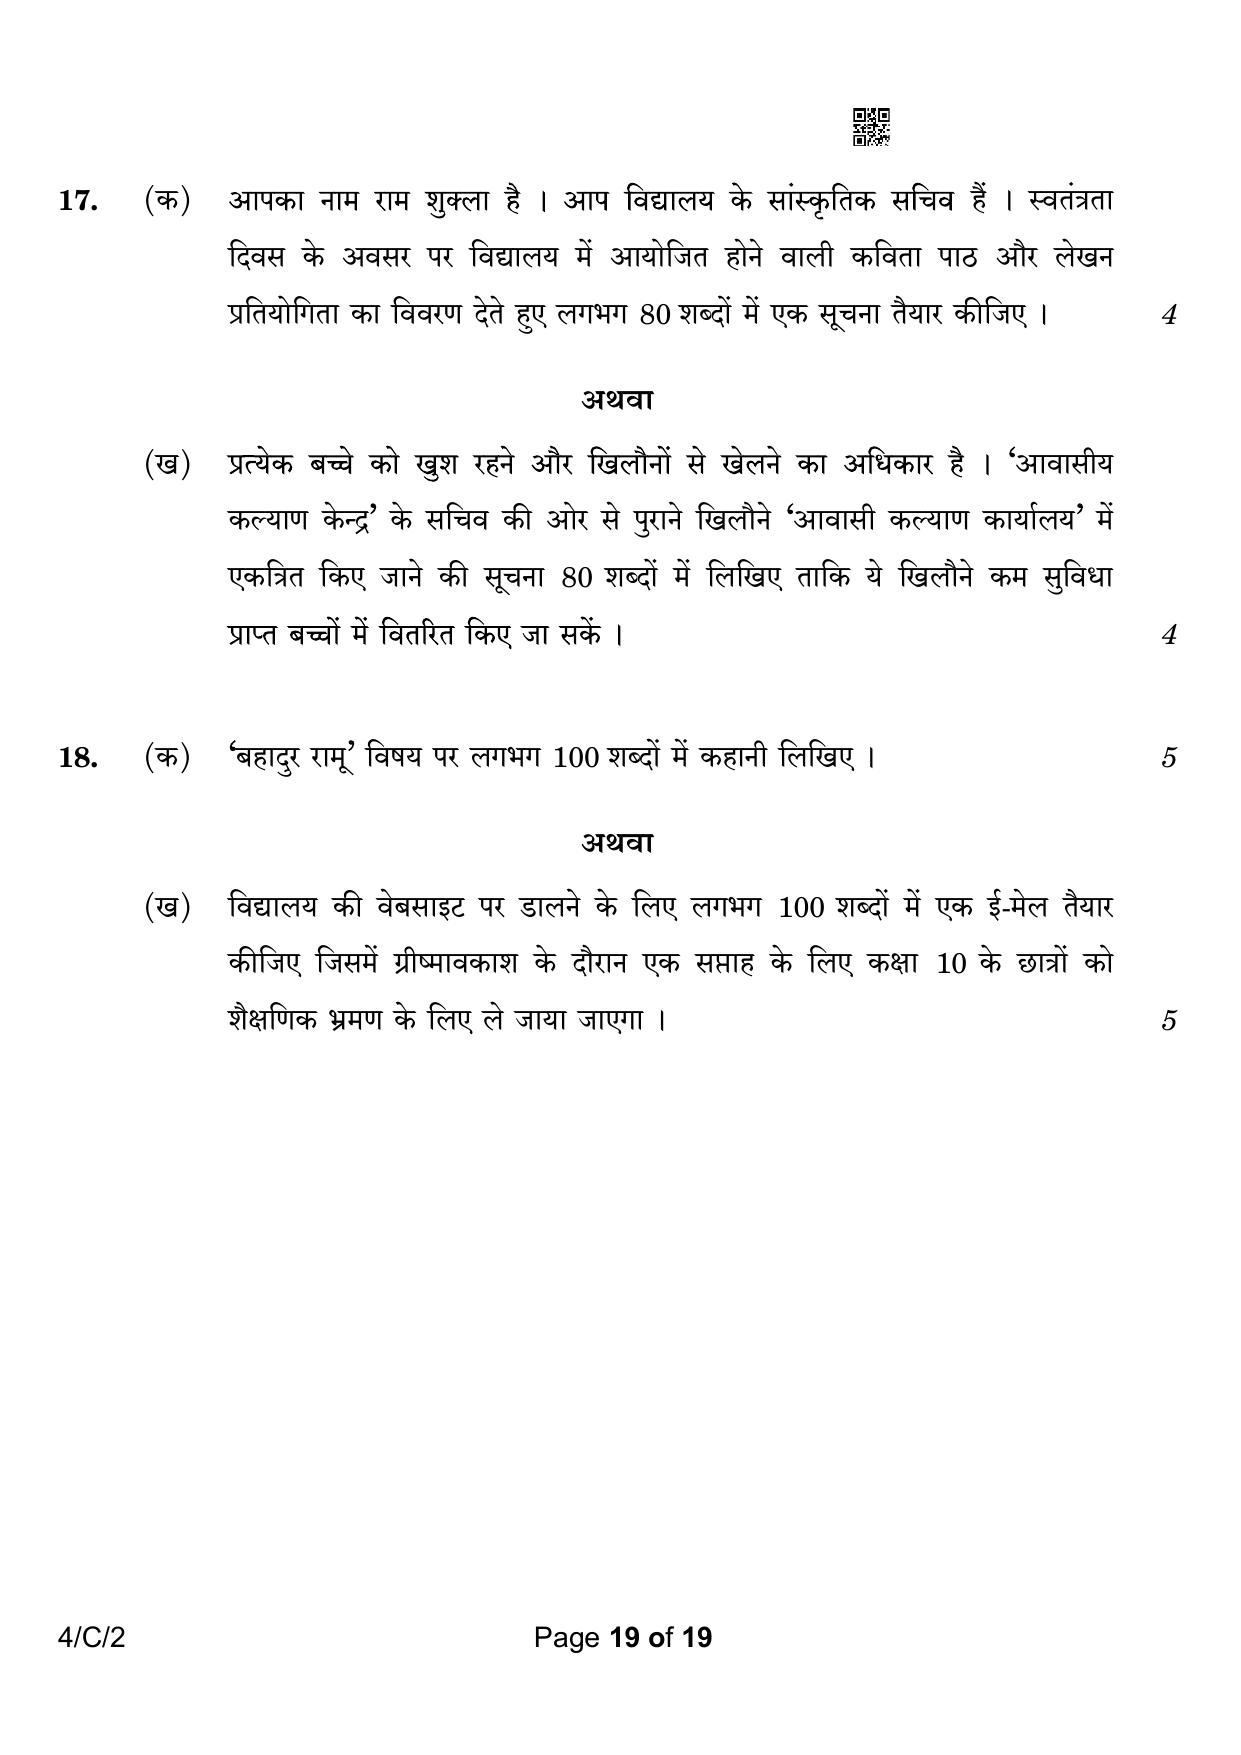 CBSE Class 10 4-2 Hindi B 2023 (Compartment) Question Paper - Page 19